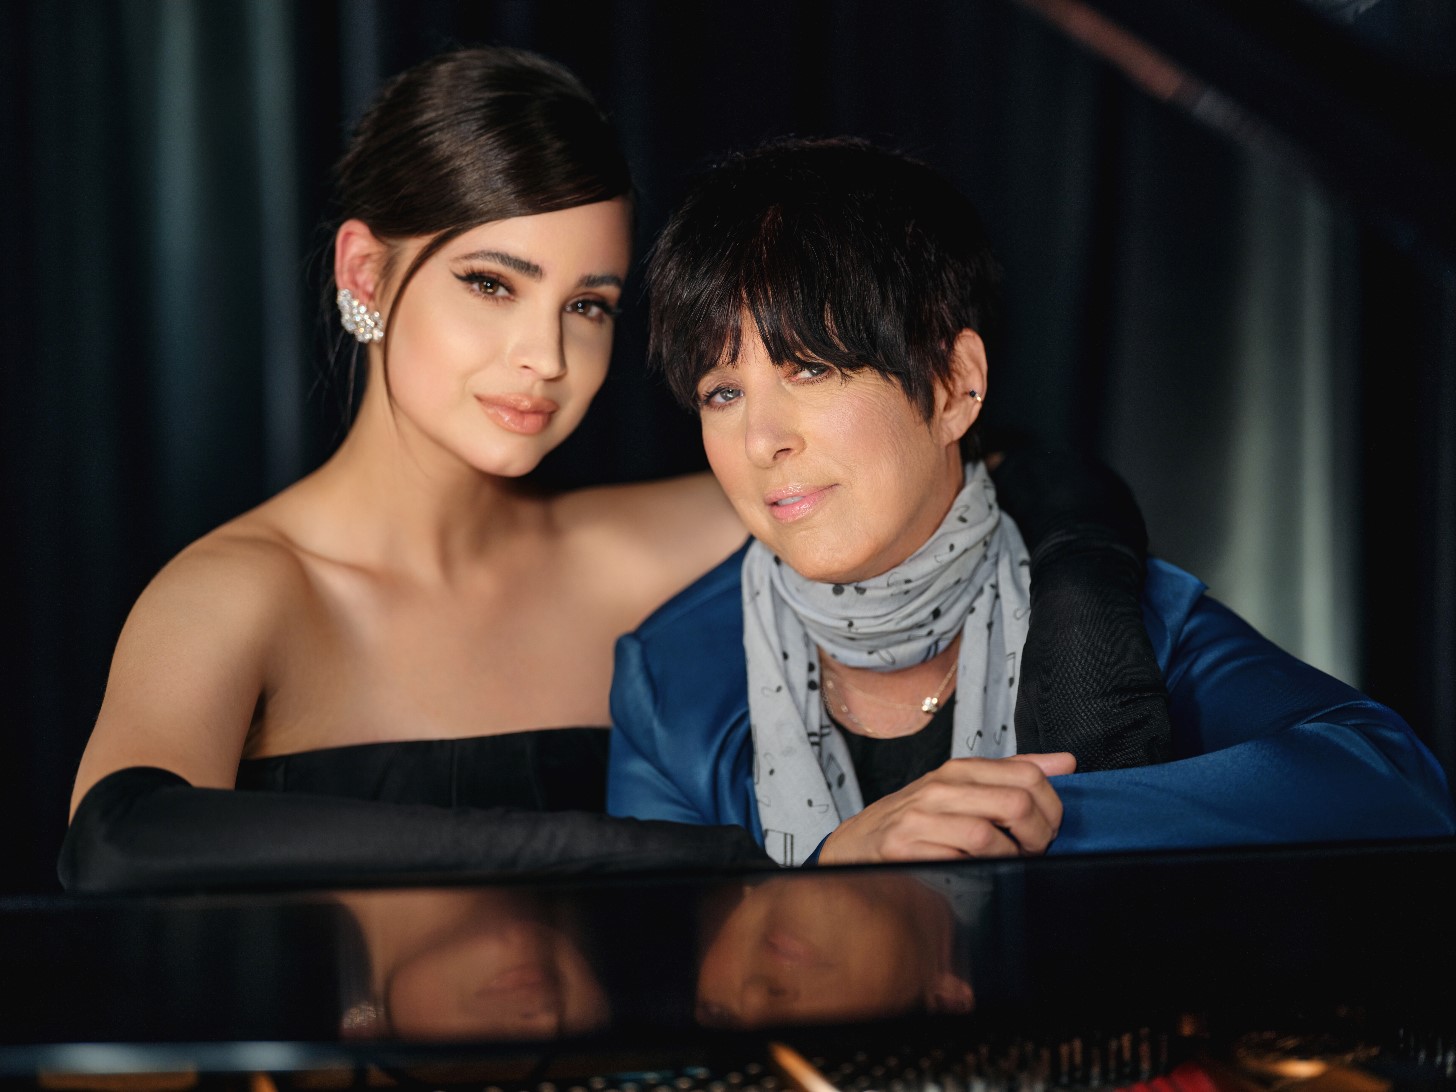 SOFIA CARSON AND DIANE WARREN TO PERFORM AT THE OSCARS®